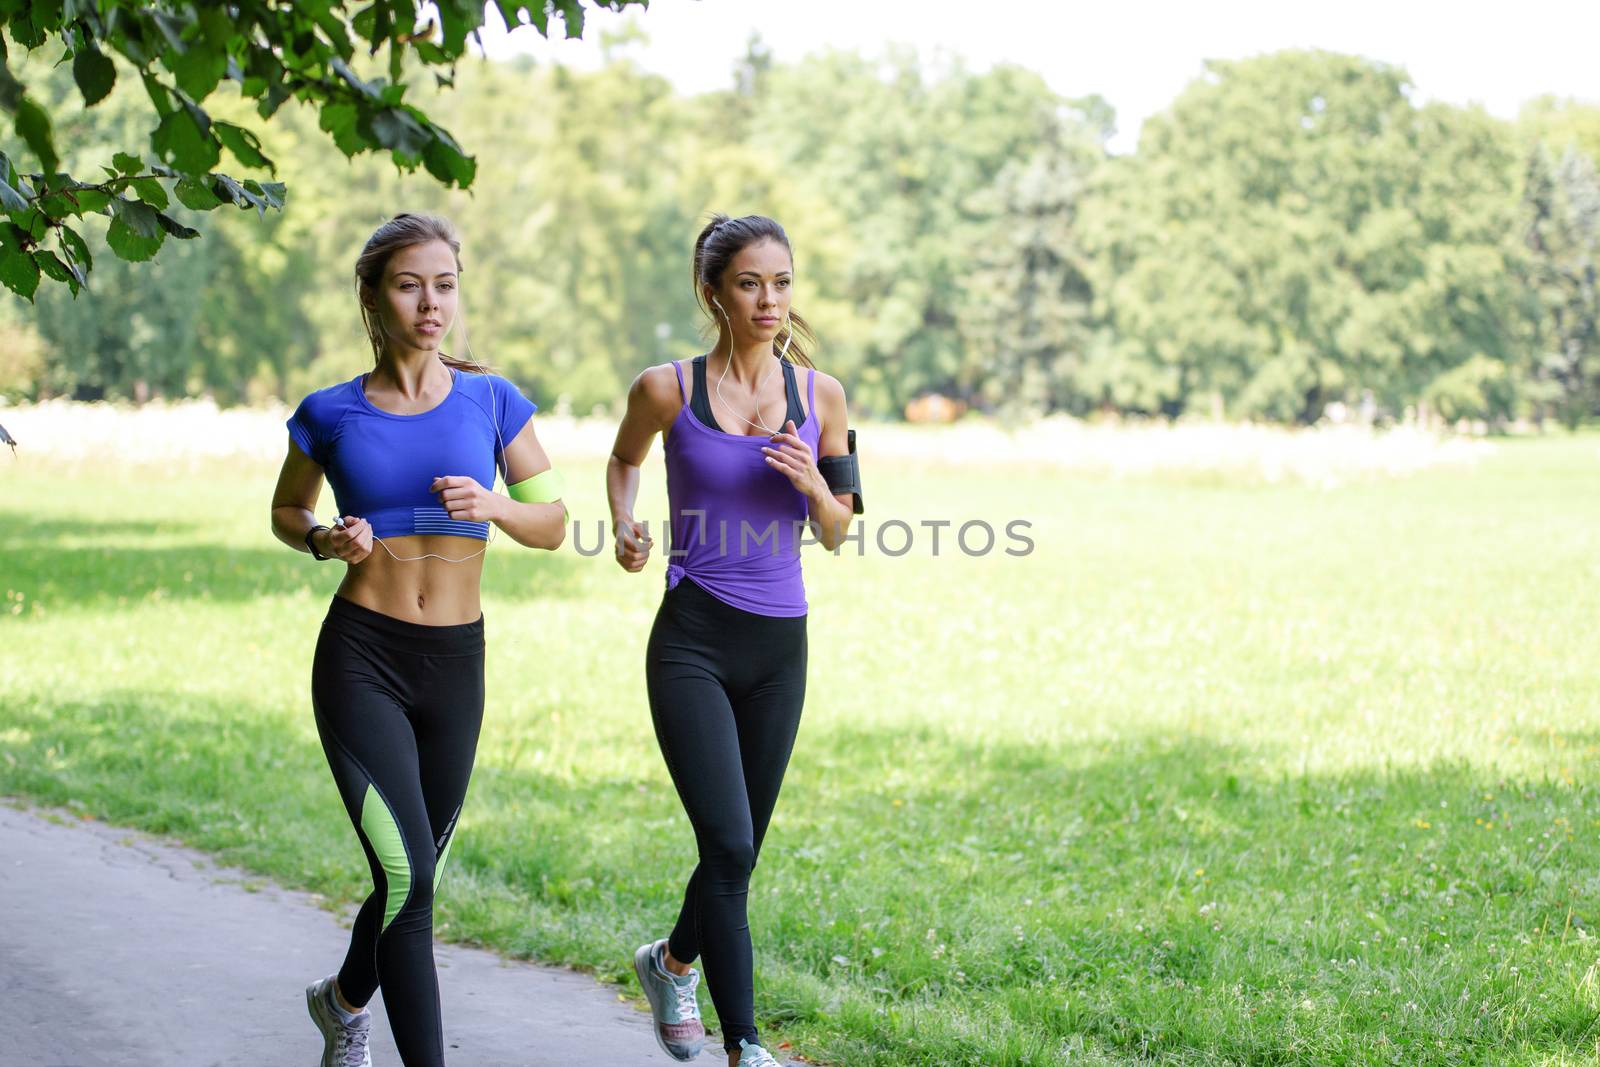 Morning jogging in the park by wdnet_studio